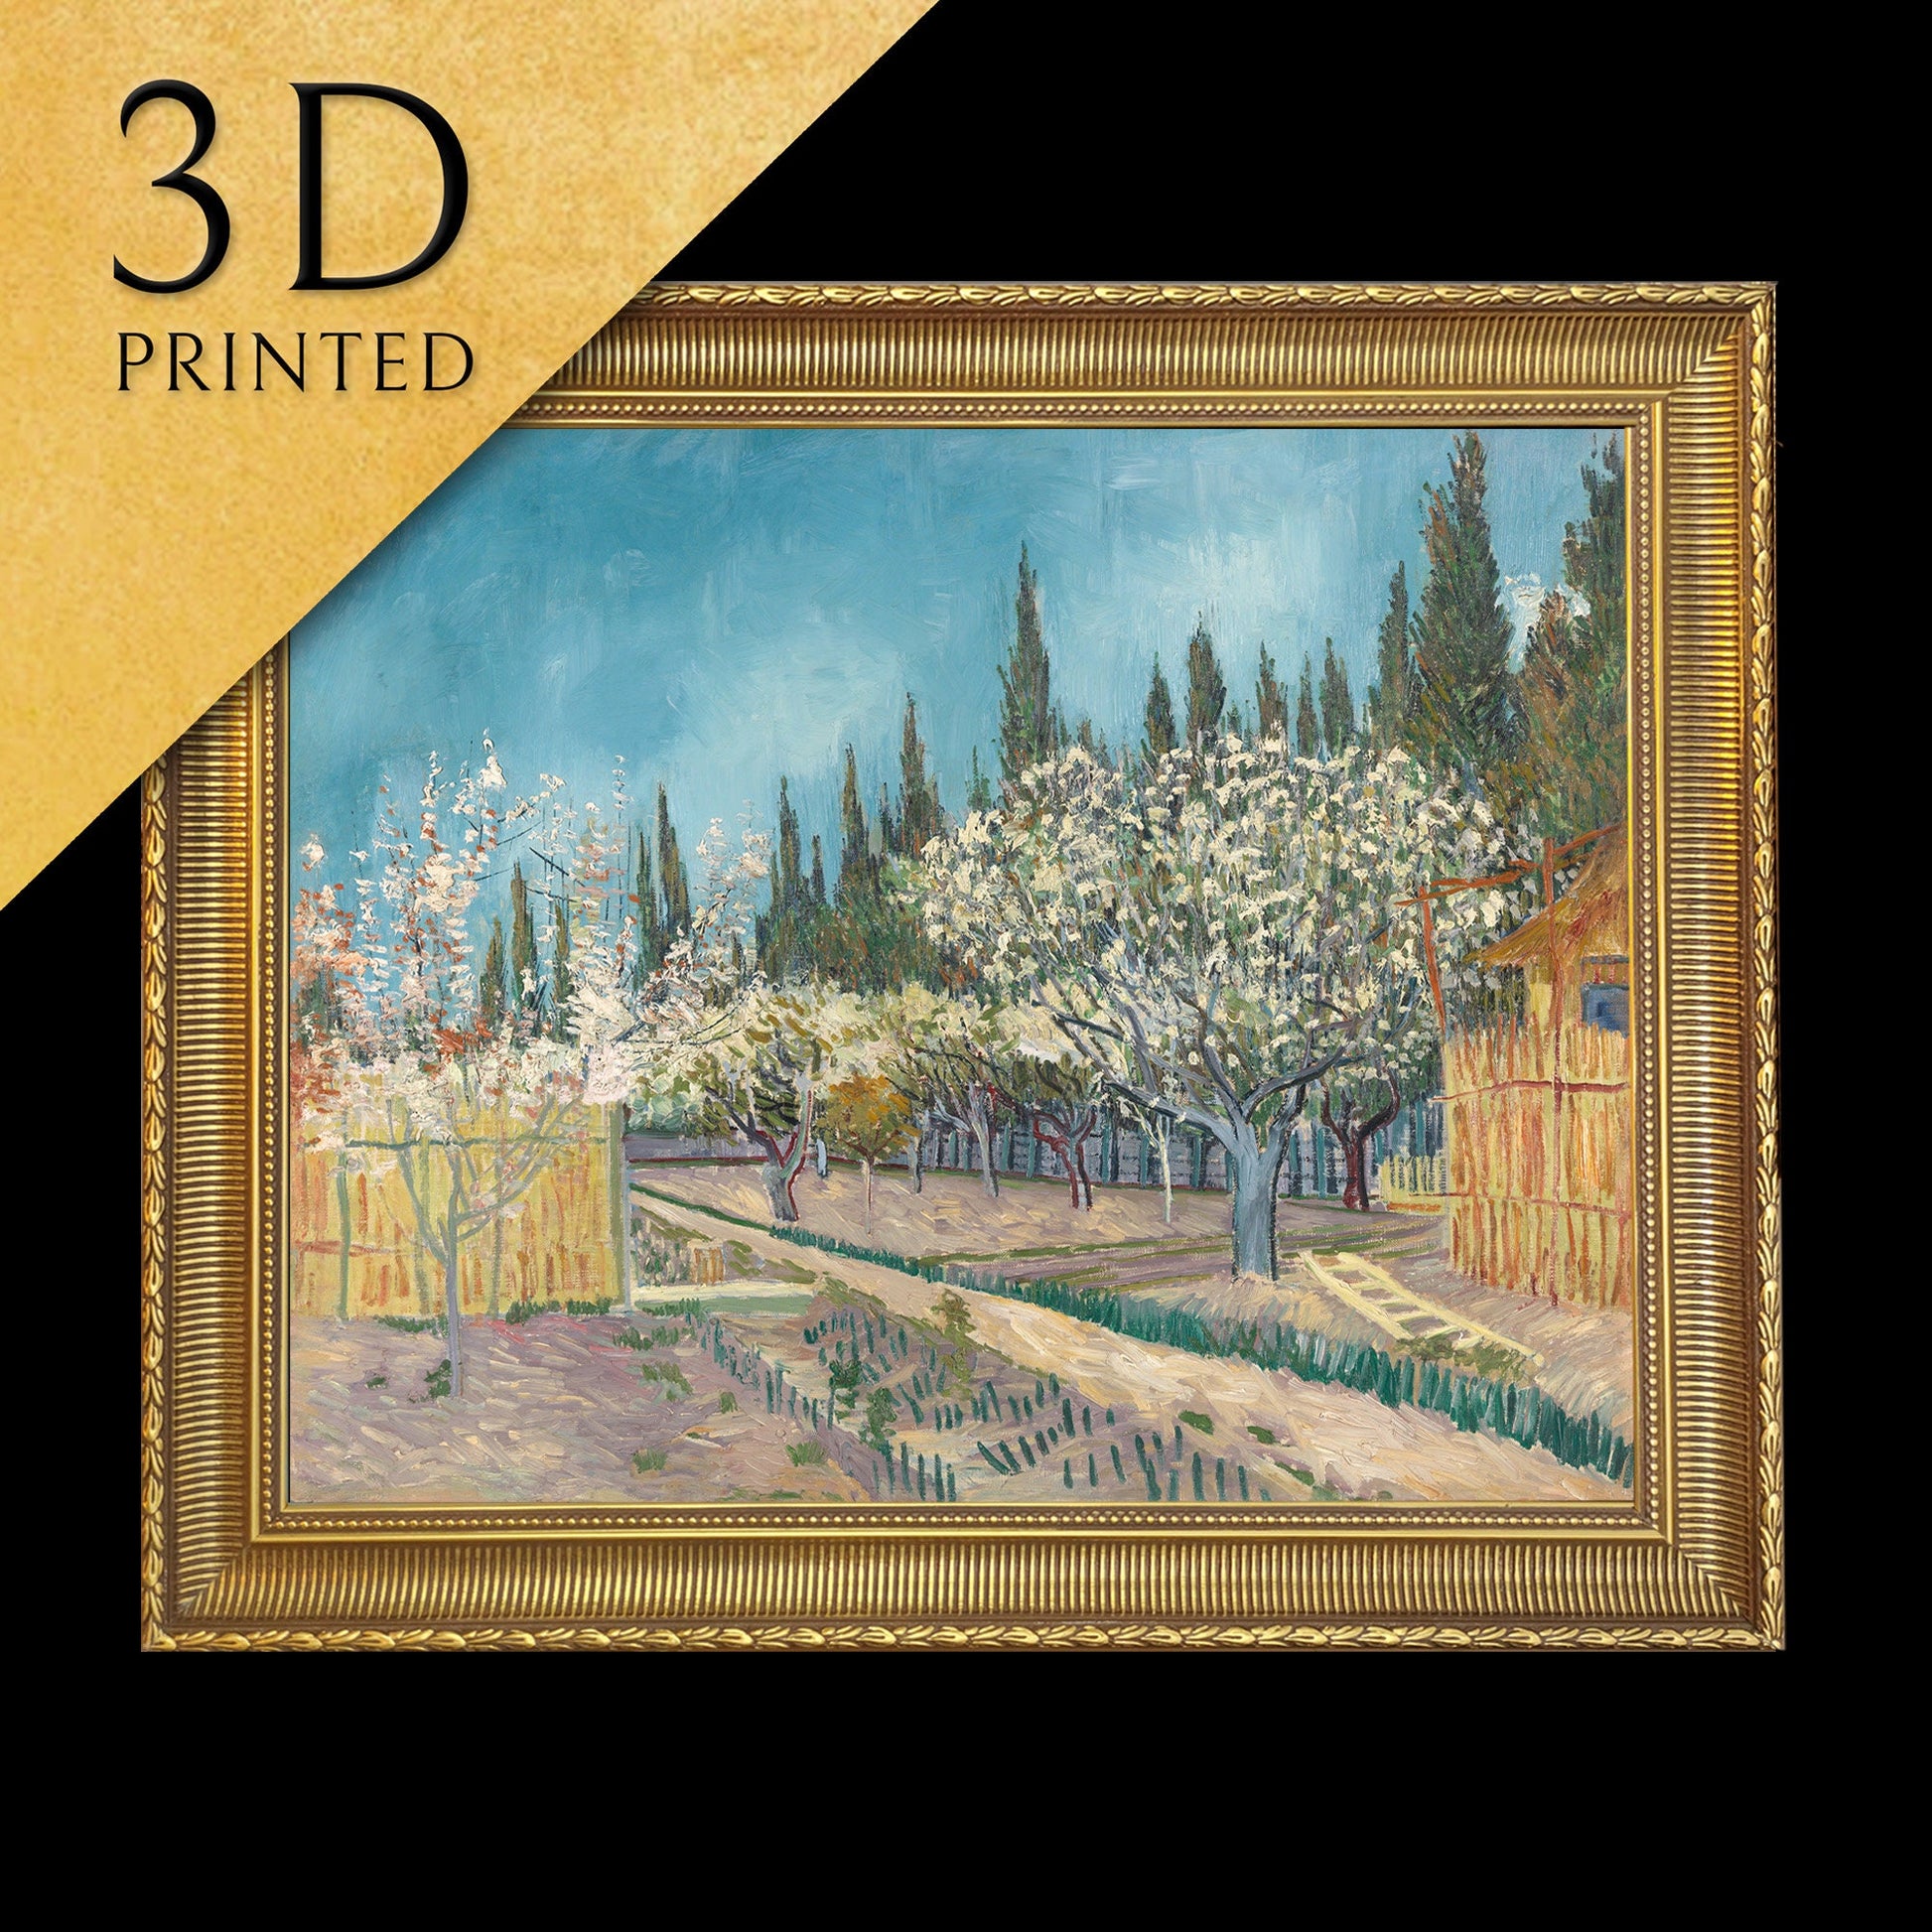 Orchard bordered by cypresses by Vincent van Gogh, 3d Printed with texture and brush strokes looks like original oil-painting, code:392